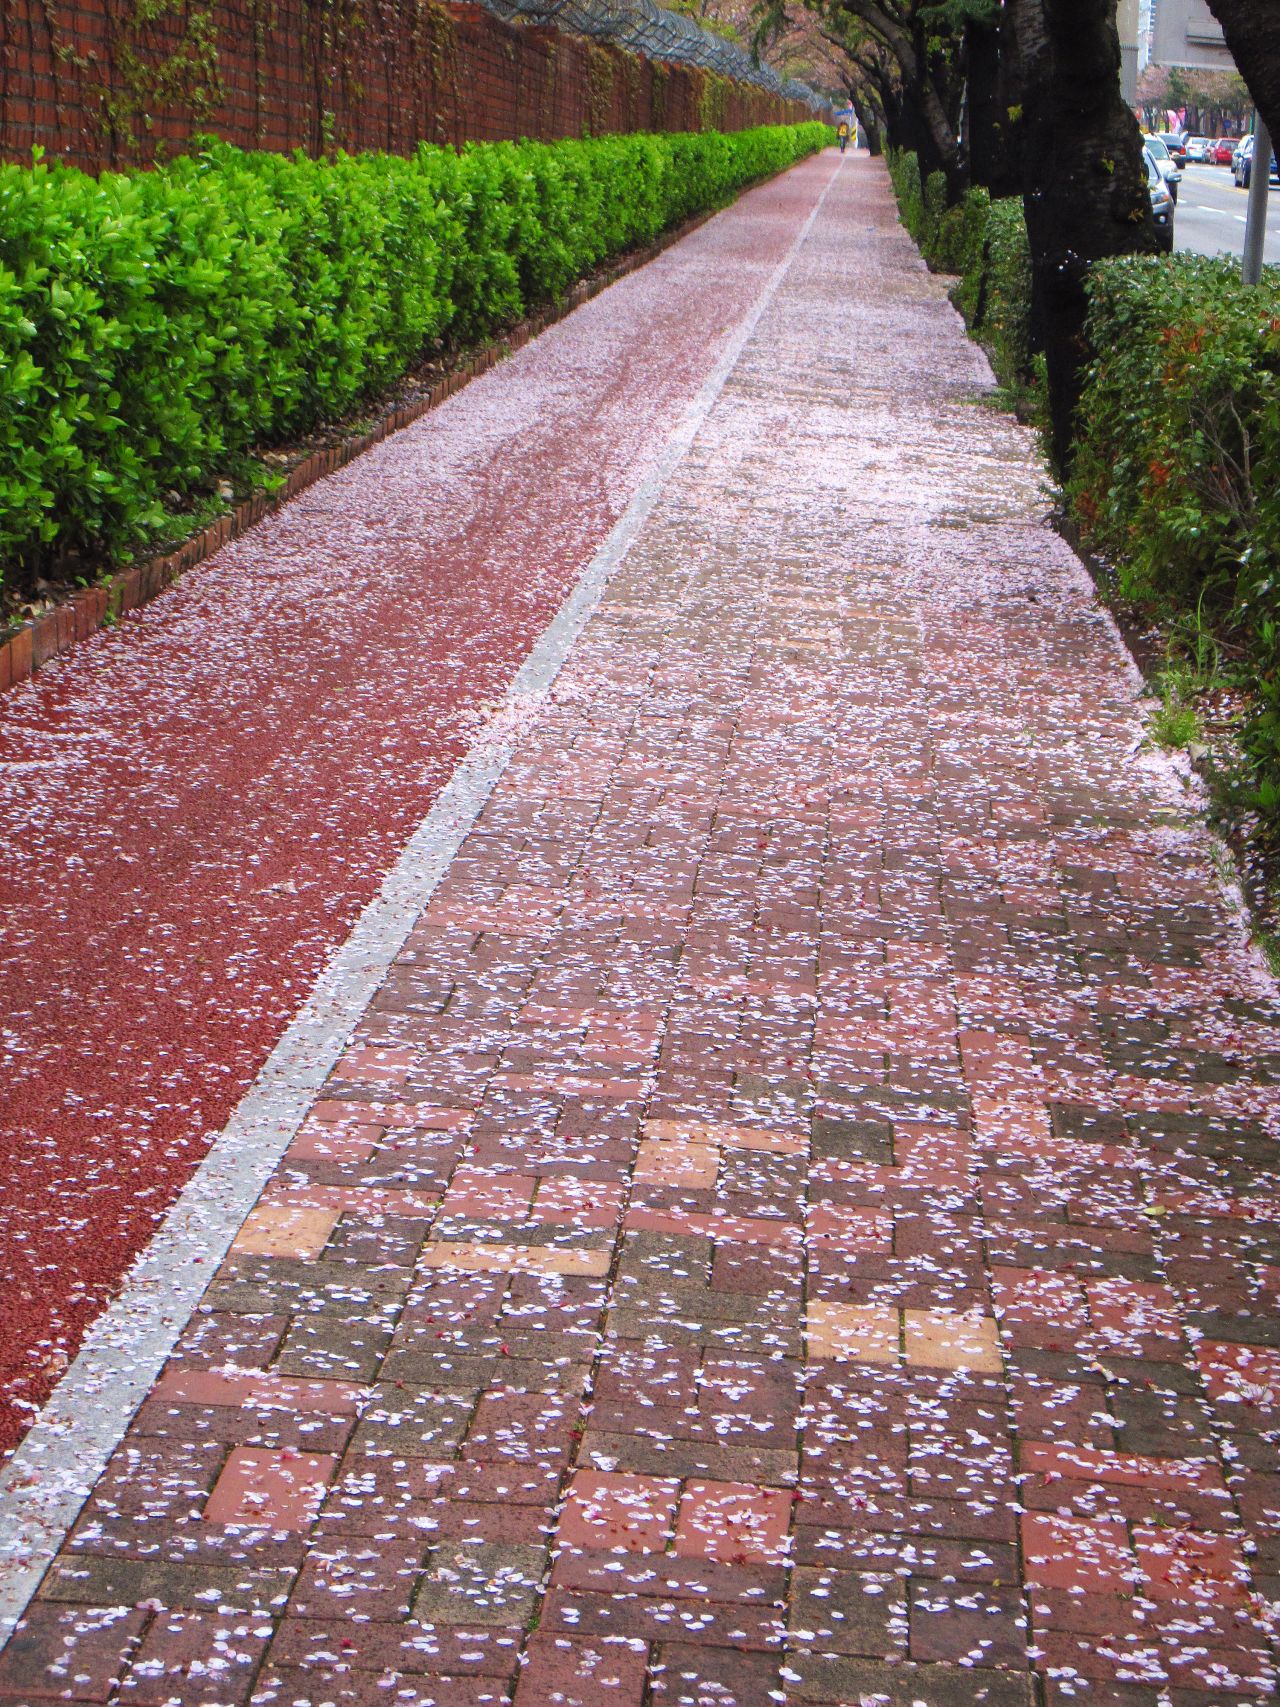 Even the slightest of breezes lead to cherry blossom petal showers that beautify paths and roads.